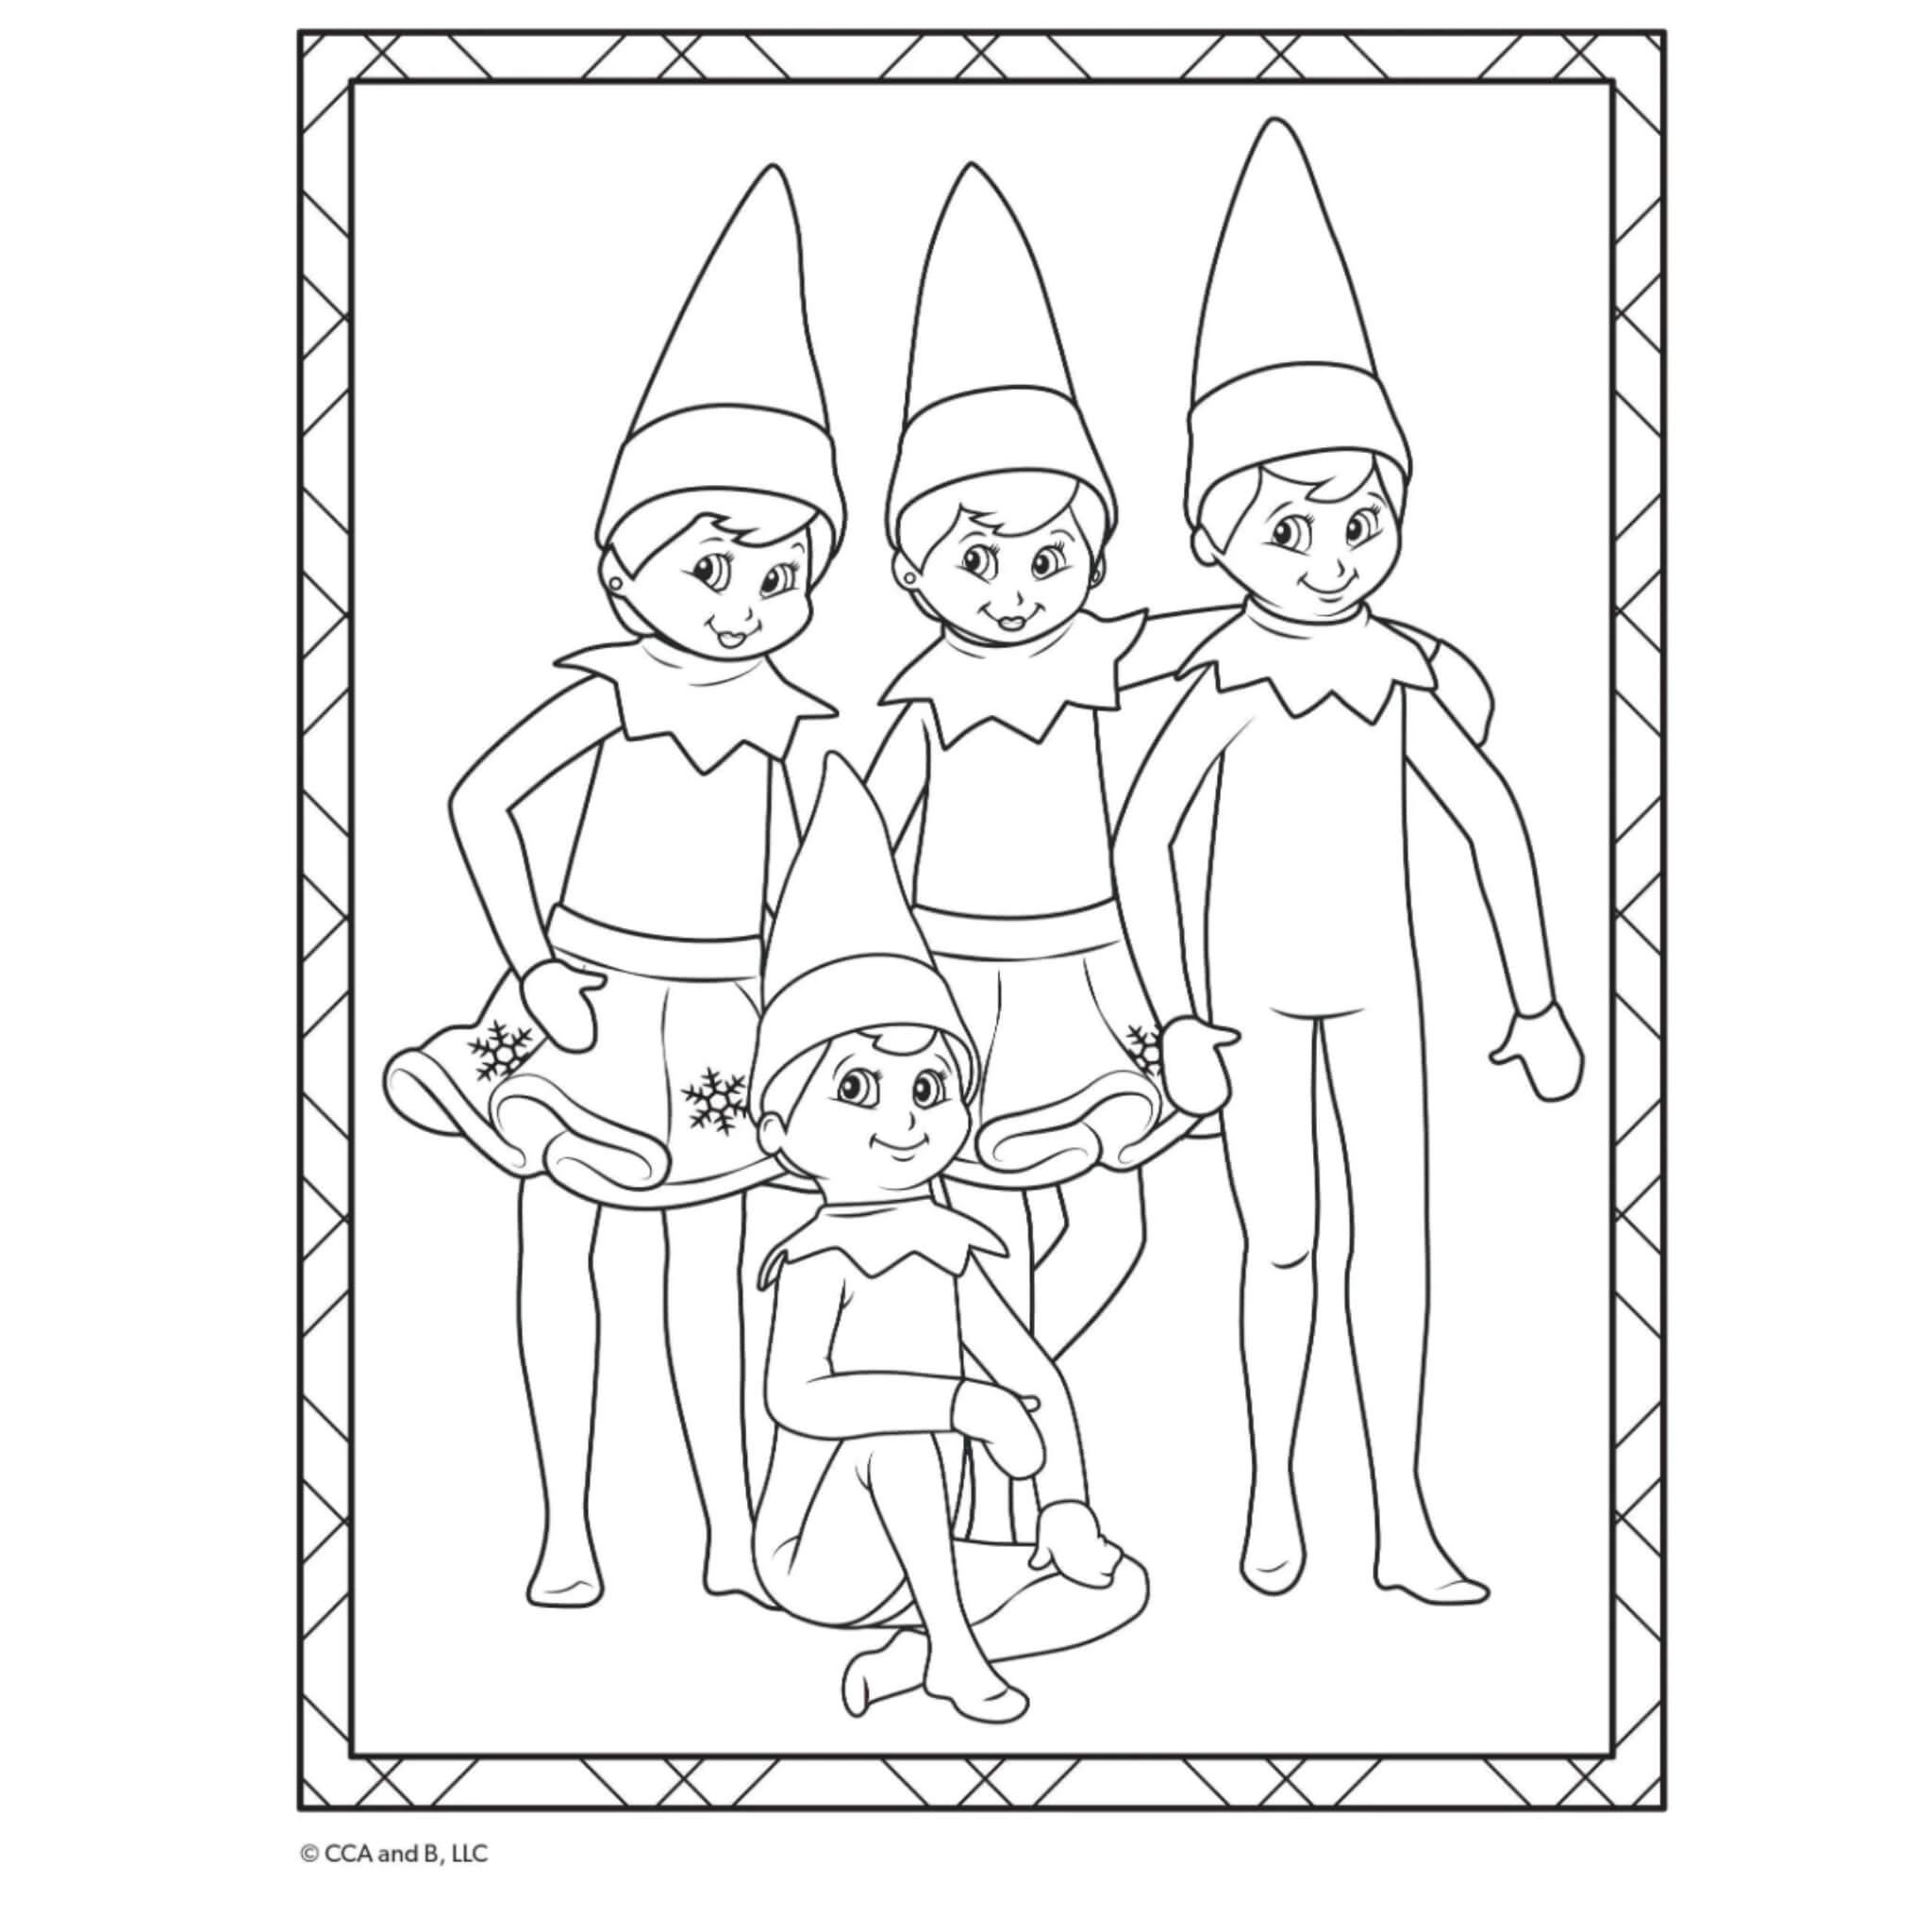 The elf on the shelf colouring book